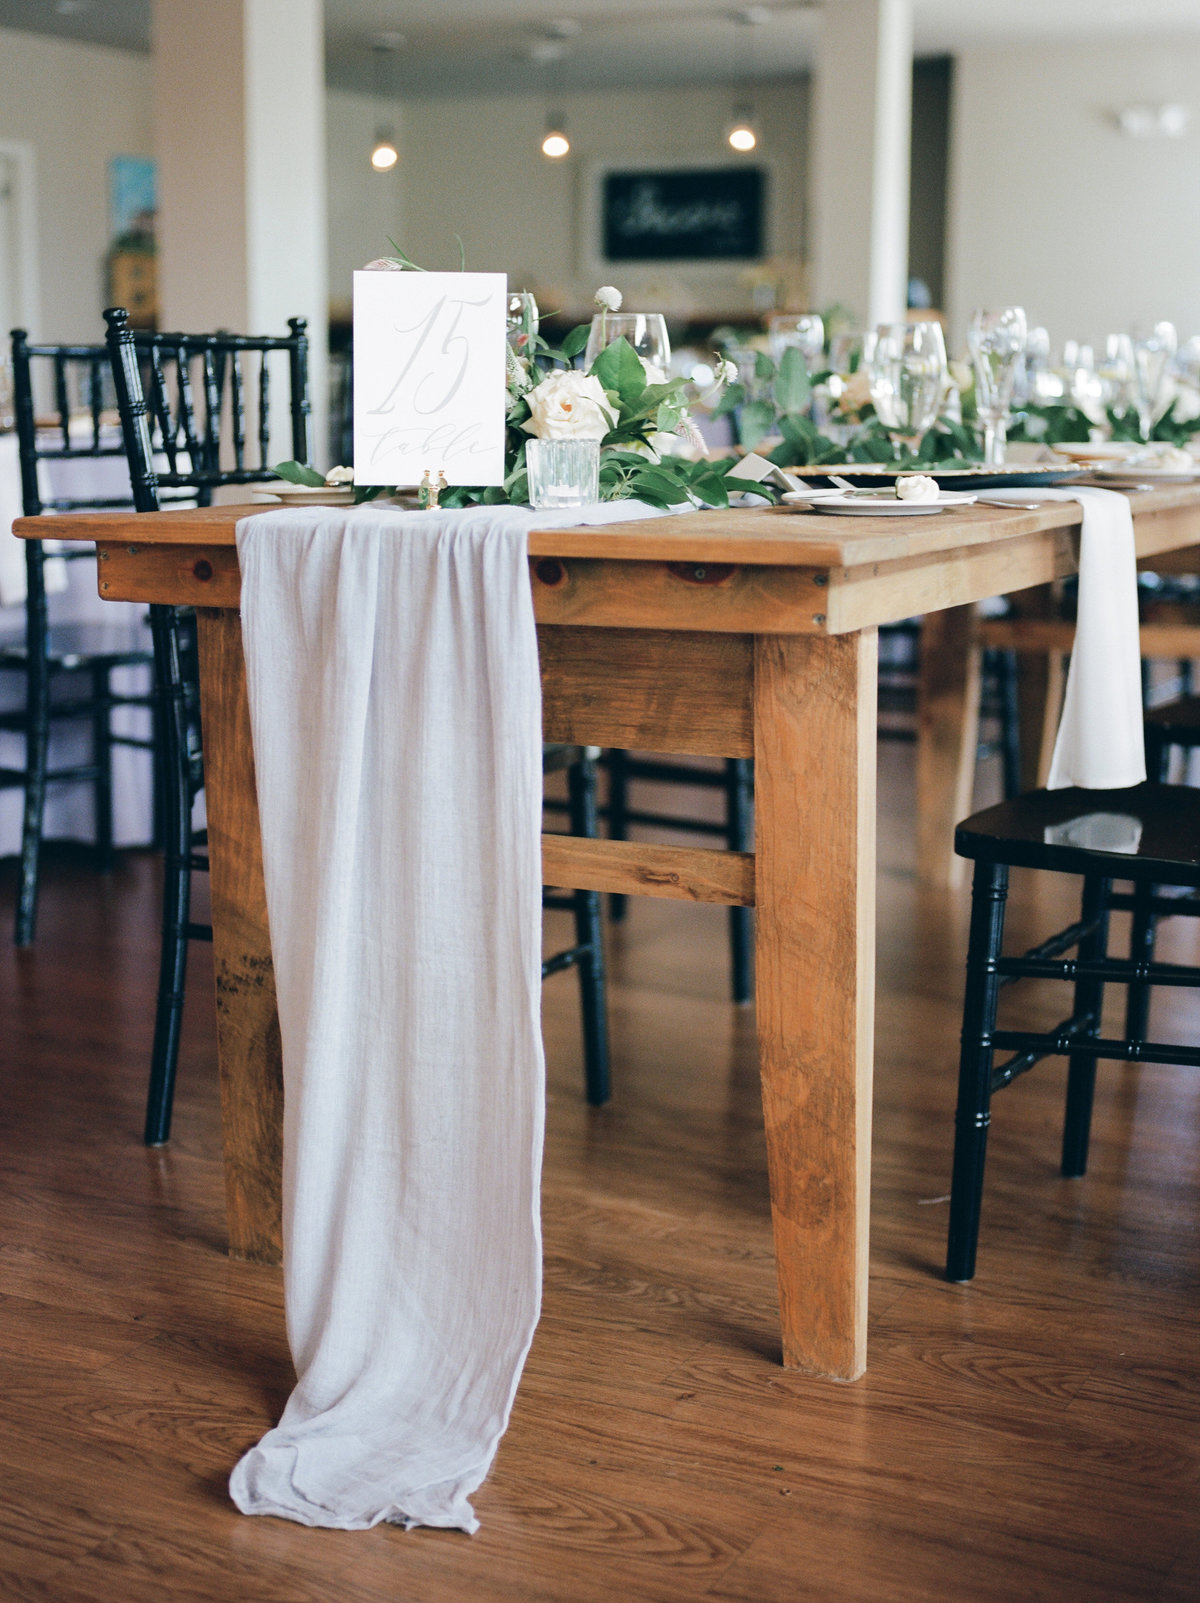 wooden table with black chairs and white table runner